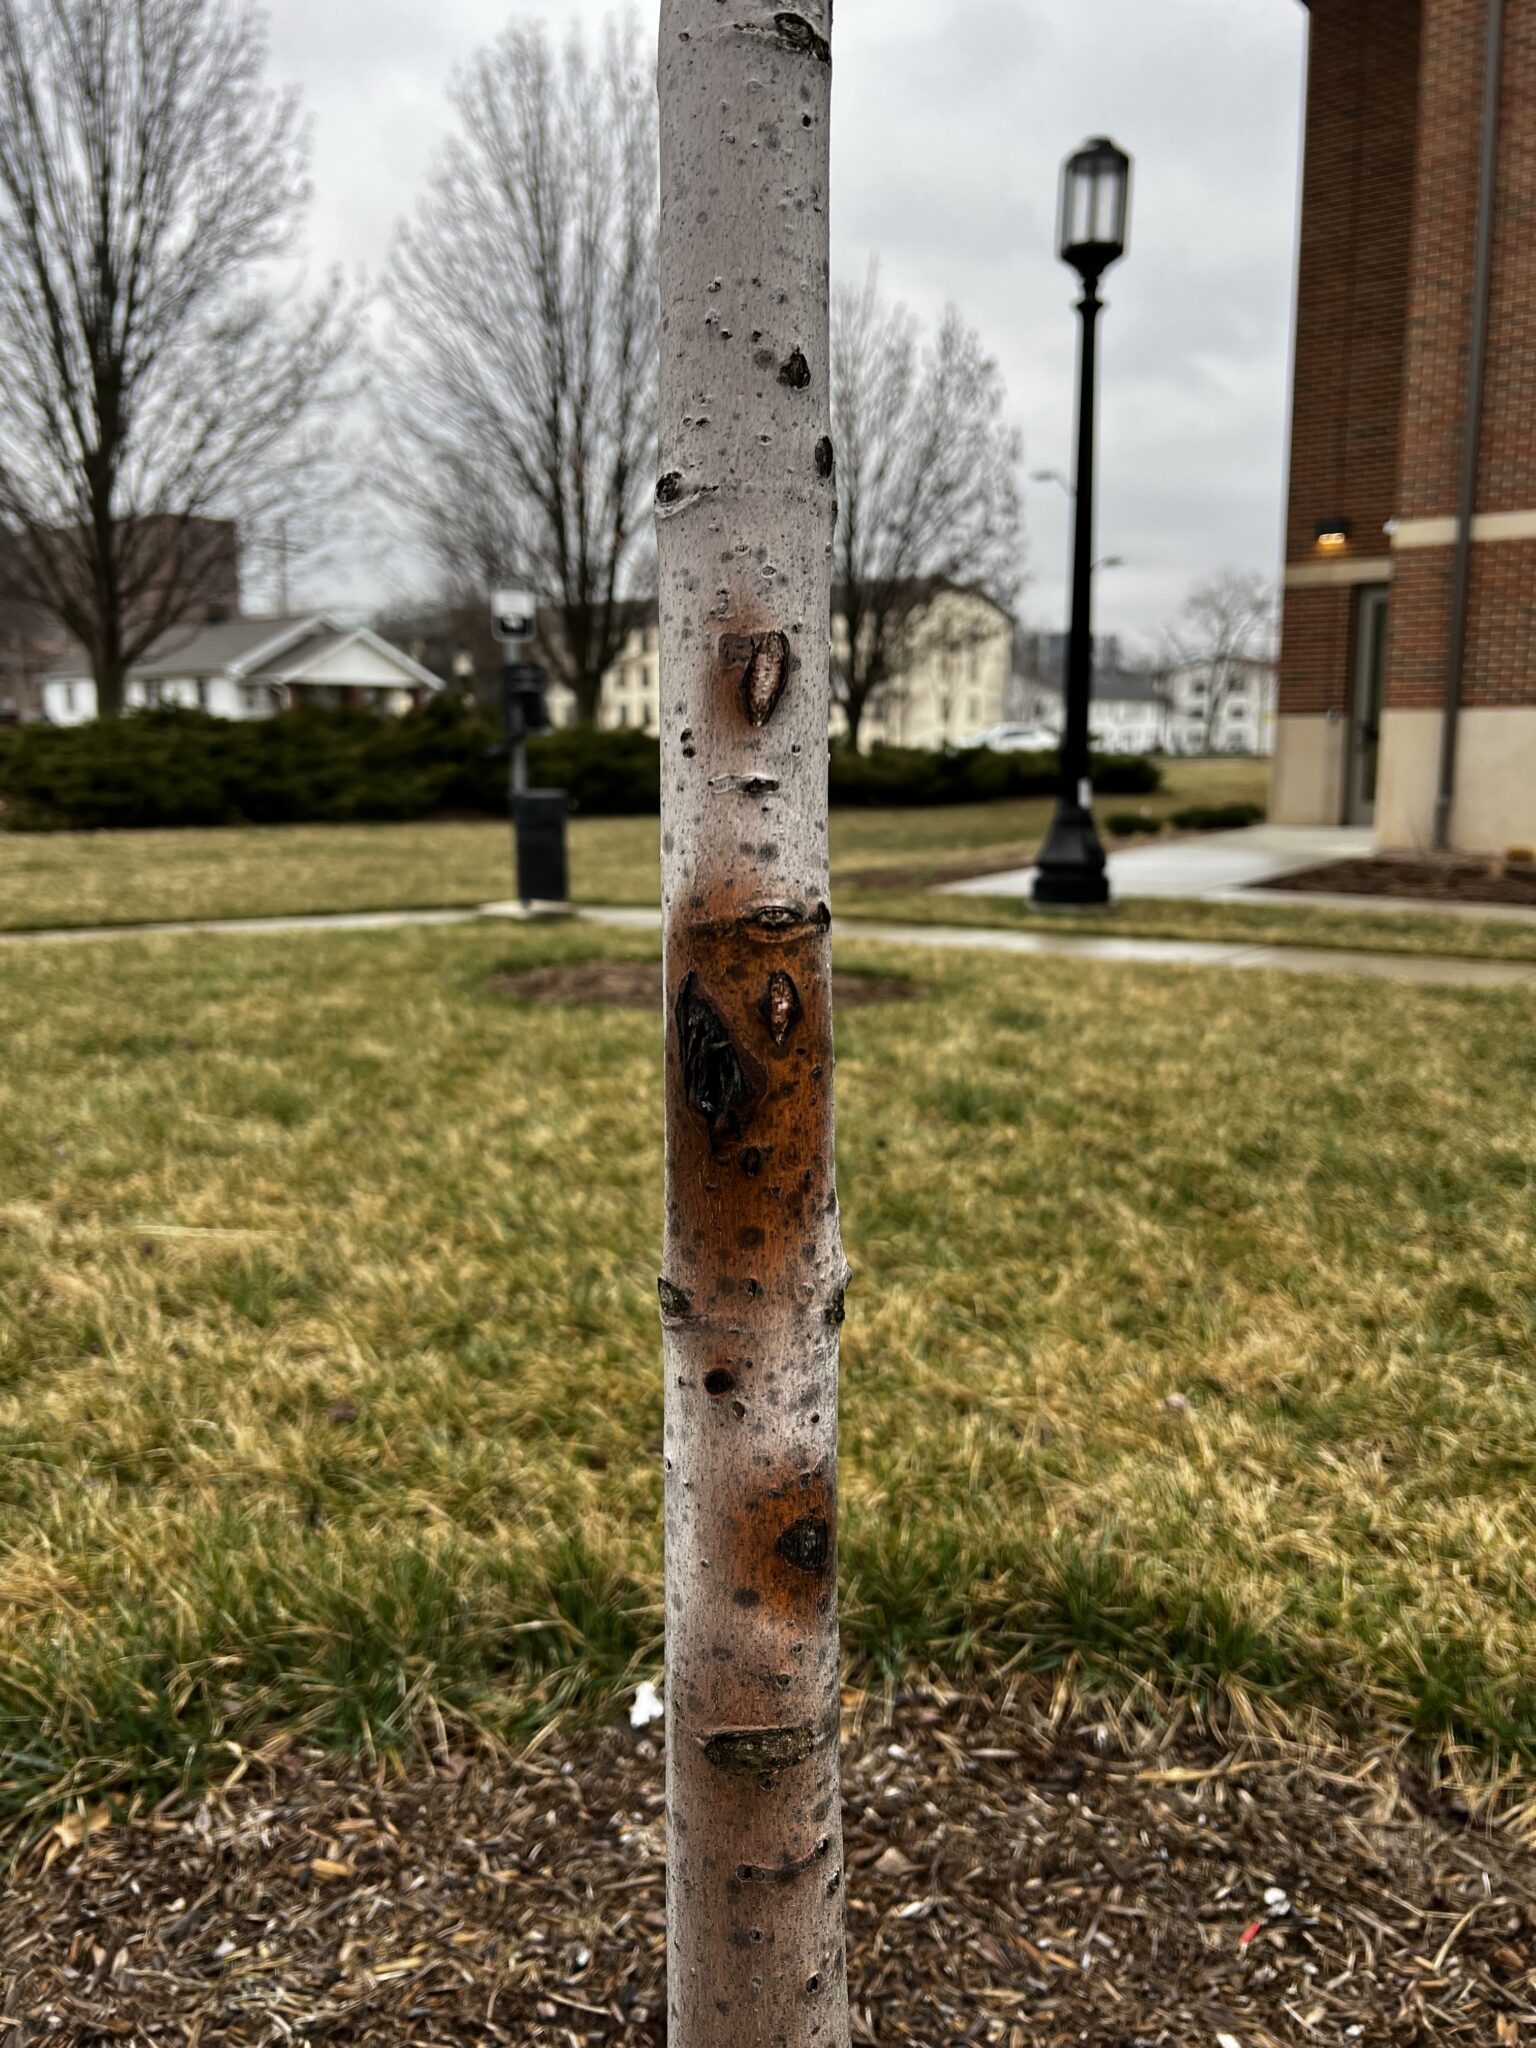 diagnosis - What is wrong with my trees? The bark on one side is cracking,  splitting, and peeling off - Gardening & Landscaping Stack Exchange